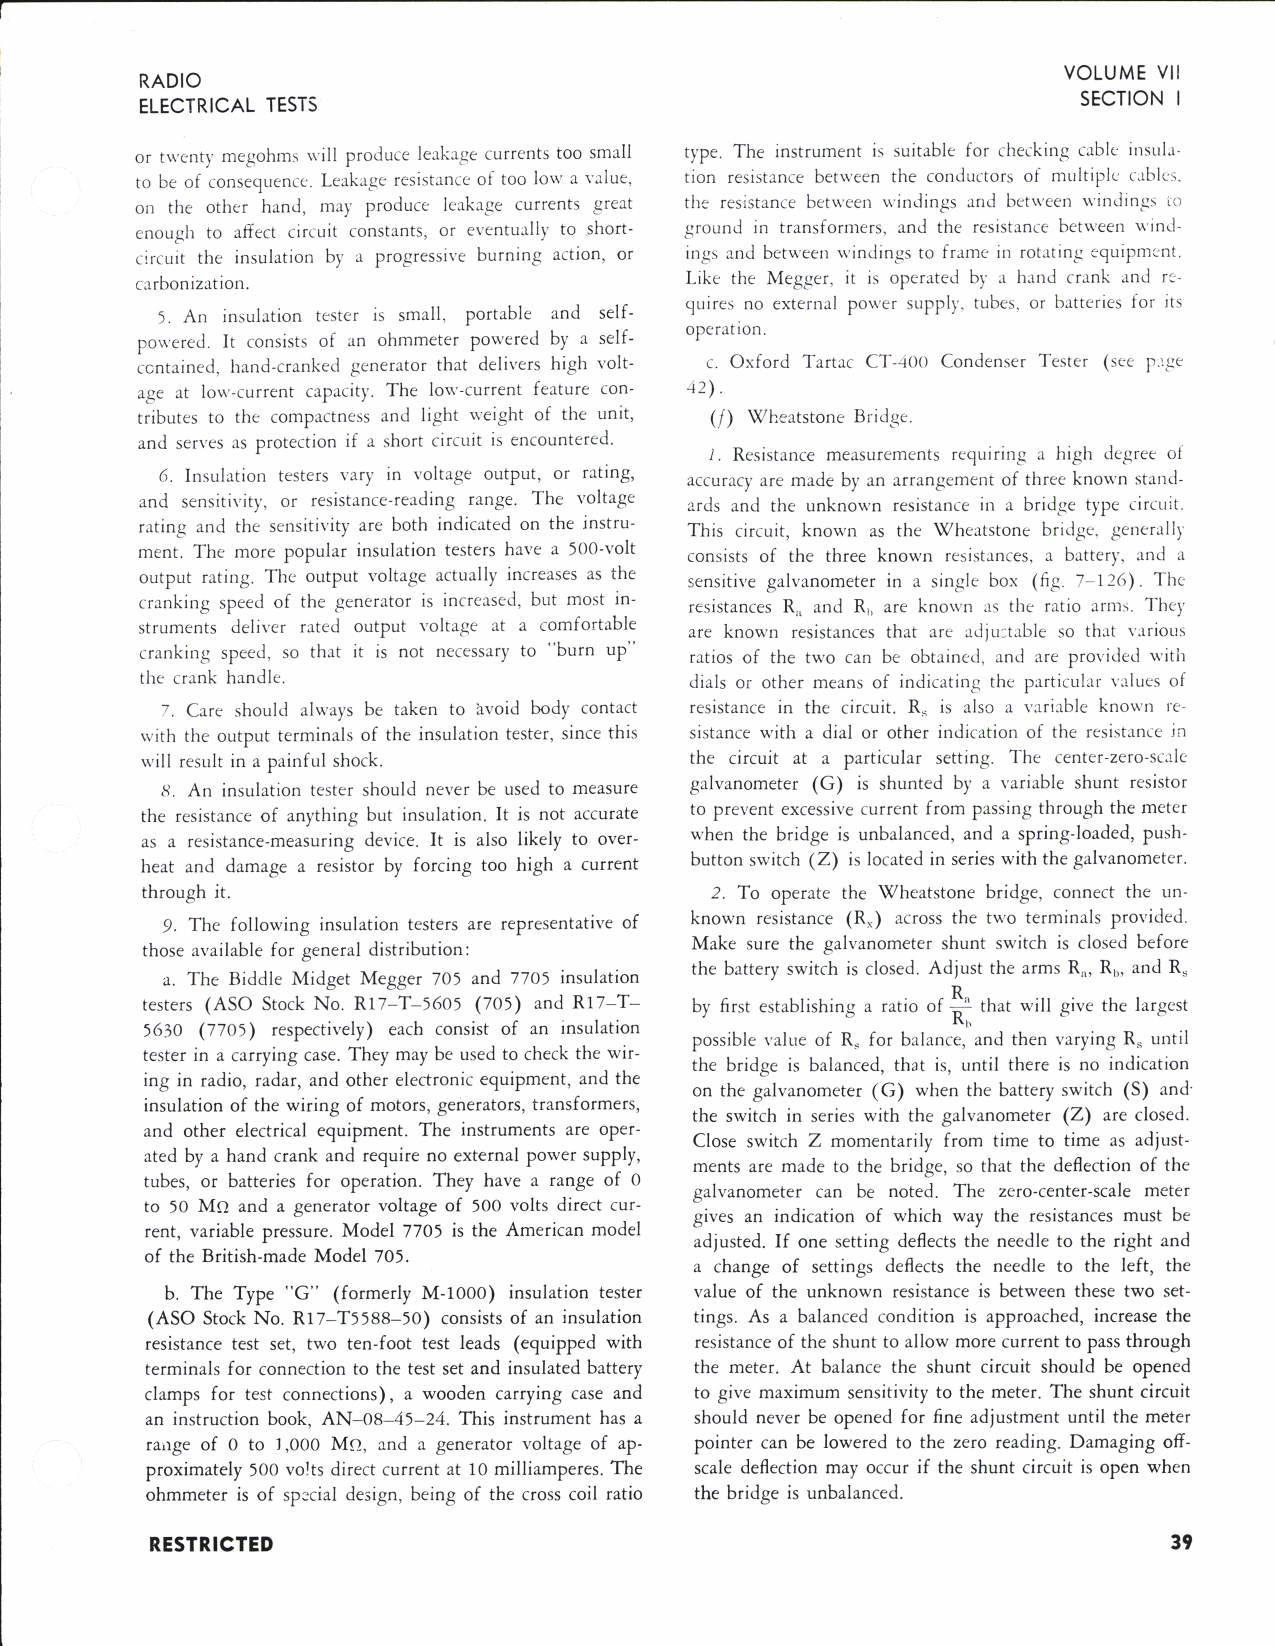 Sample page 45 from AirCorps Library document: Aeronautical Technical Inspection Manual - Radio